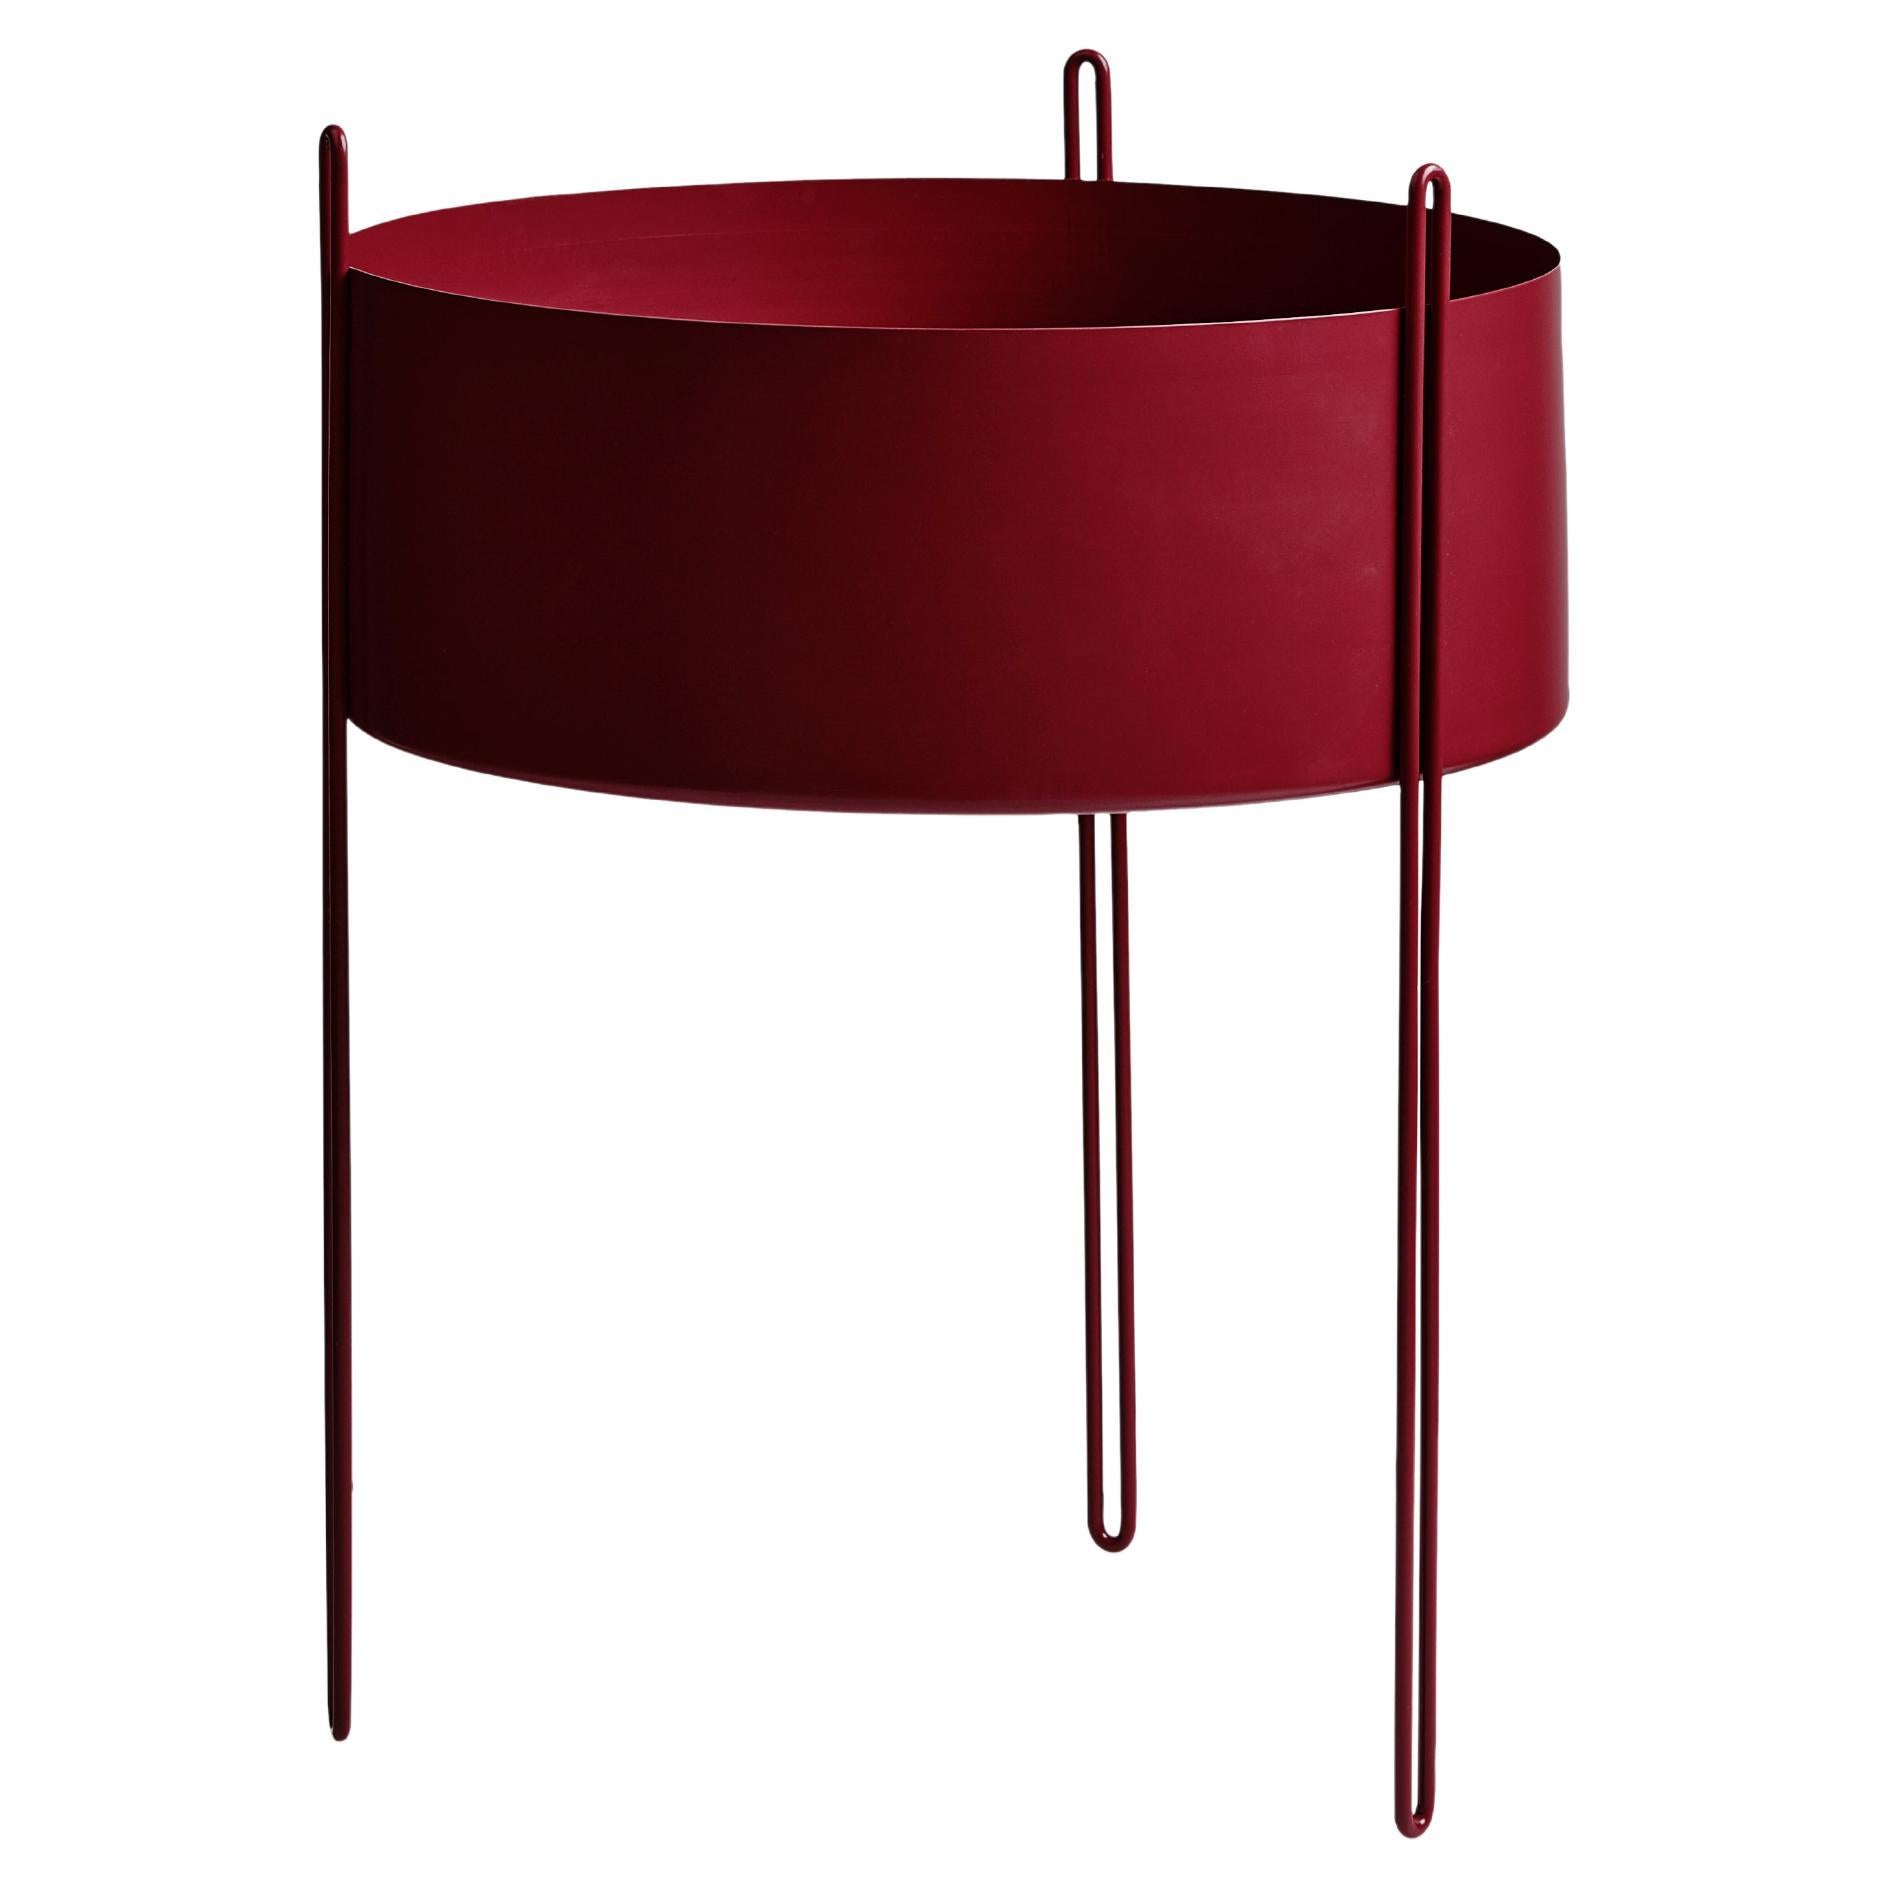 Large Red Pidestall Planter by Emilie Stahl Carlsen